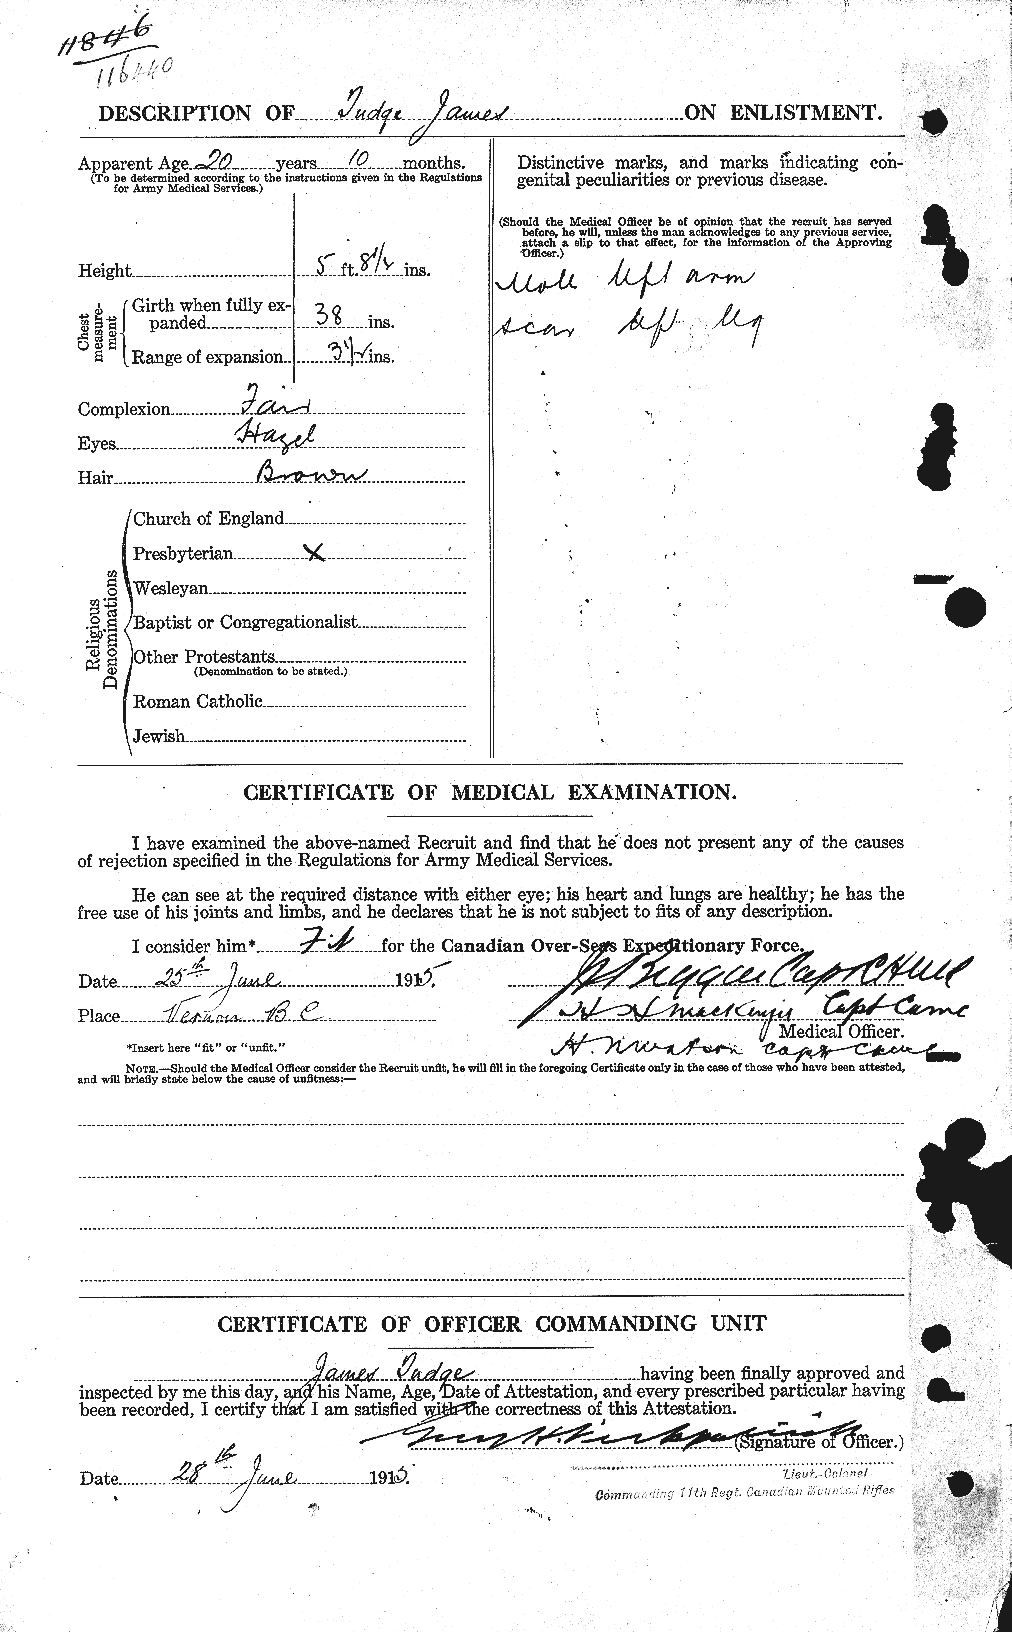 Personnel Records of the First World War - CEF 642931b